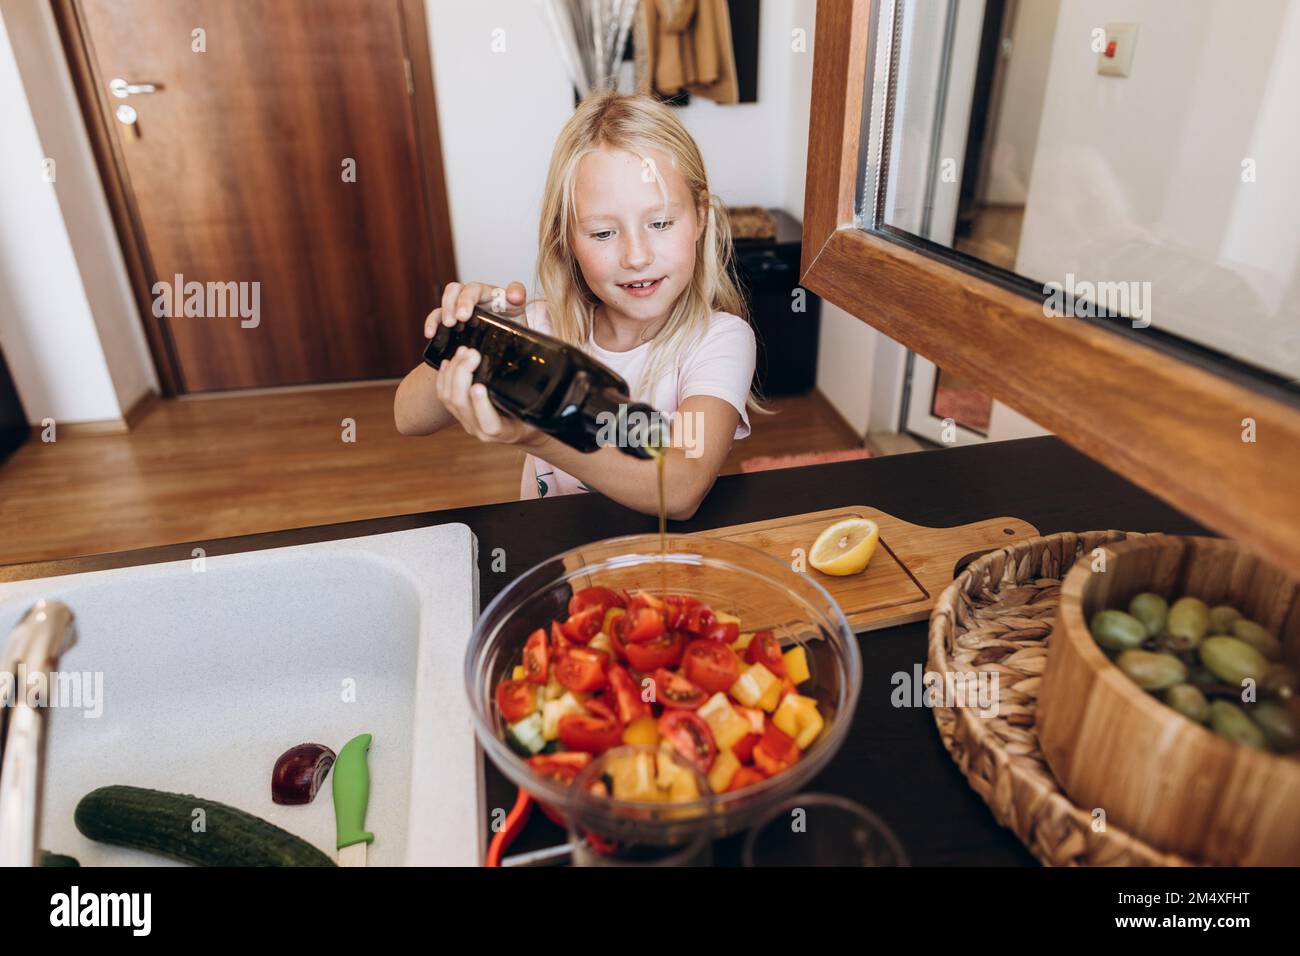 Girl preparing a salad in the kitchen pouring oil into bowl Stock Photo